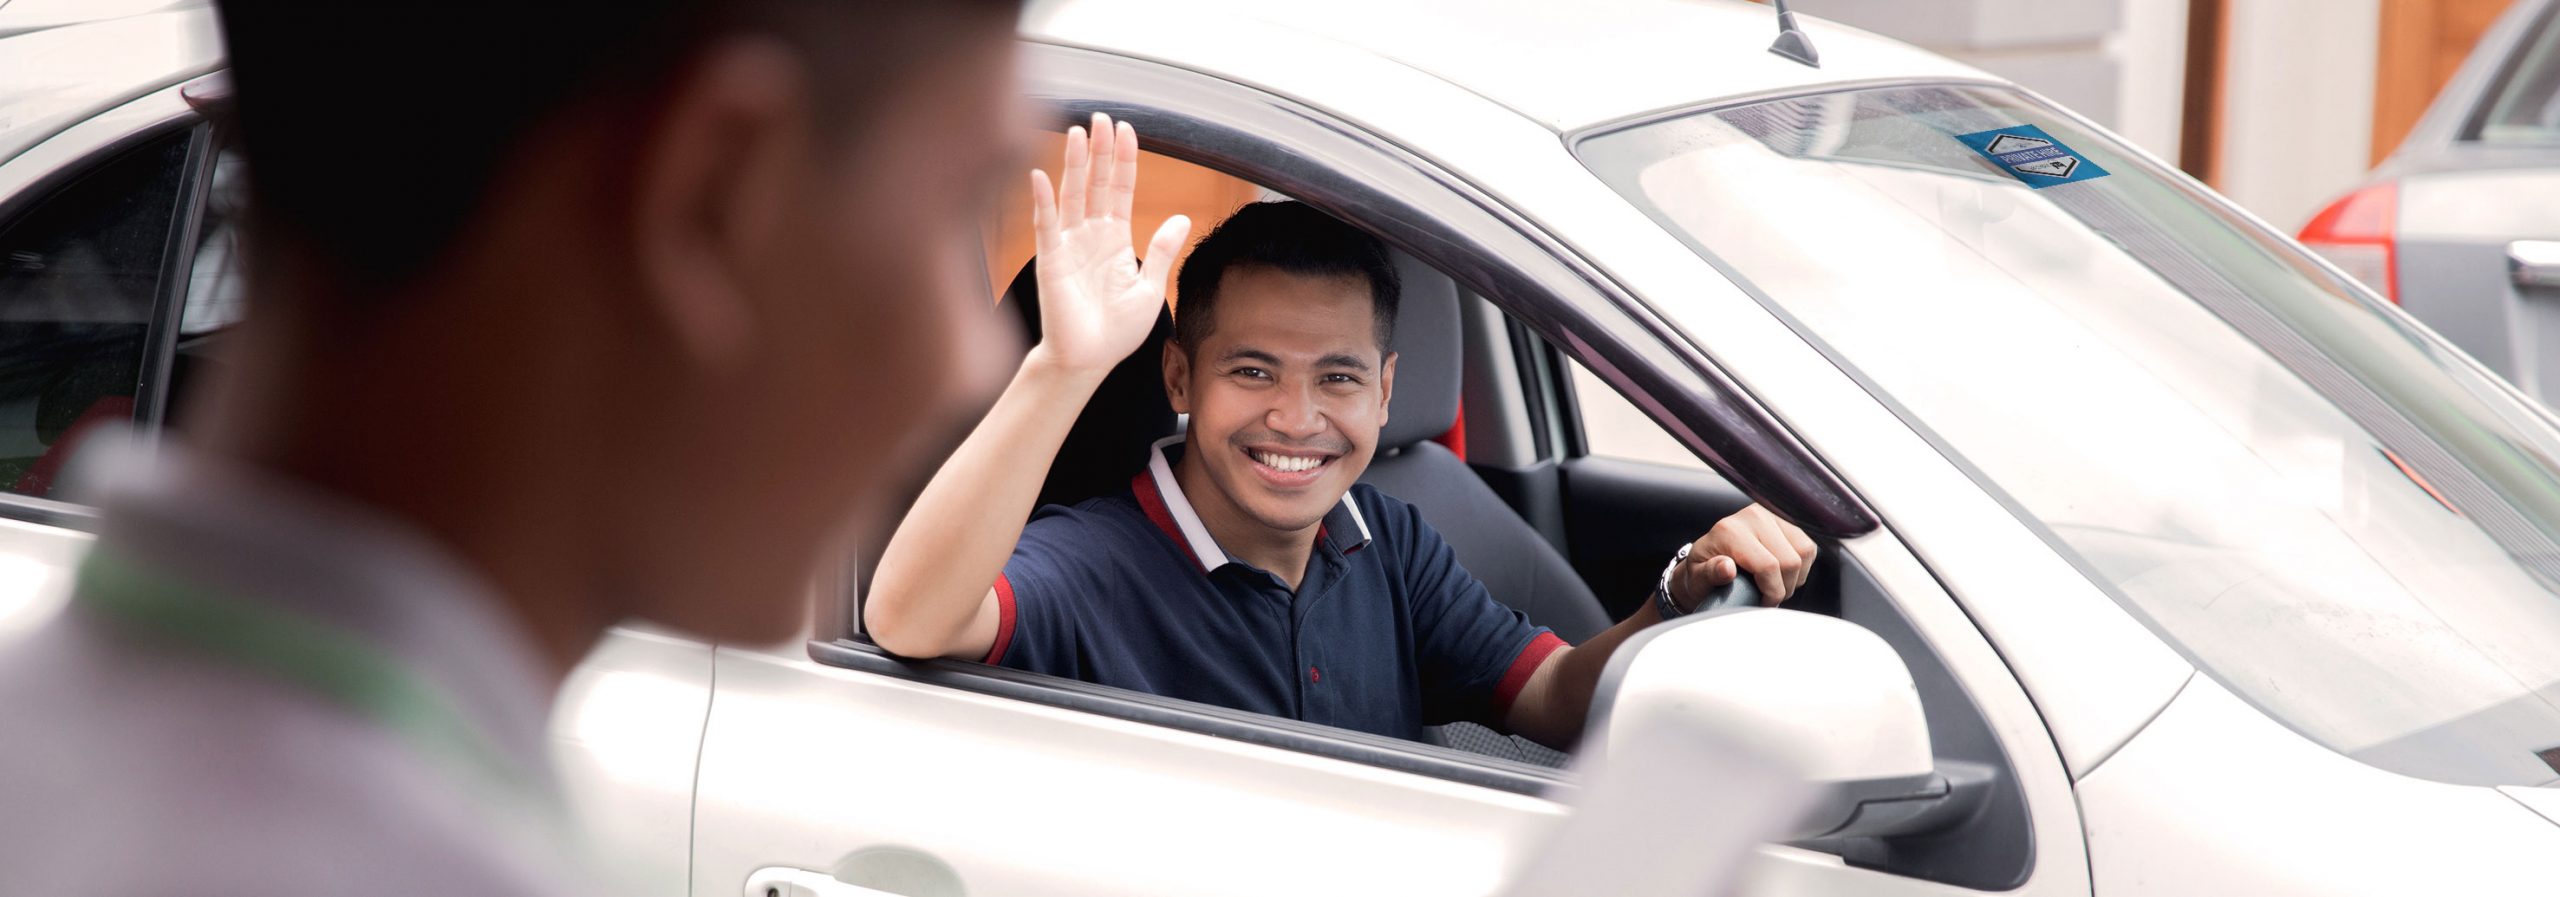 Enjoy These Benefits When You Join CDG Zig As A PHV Driver